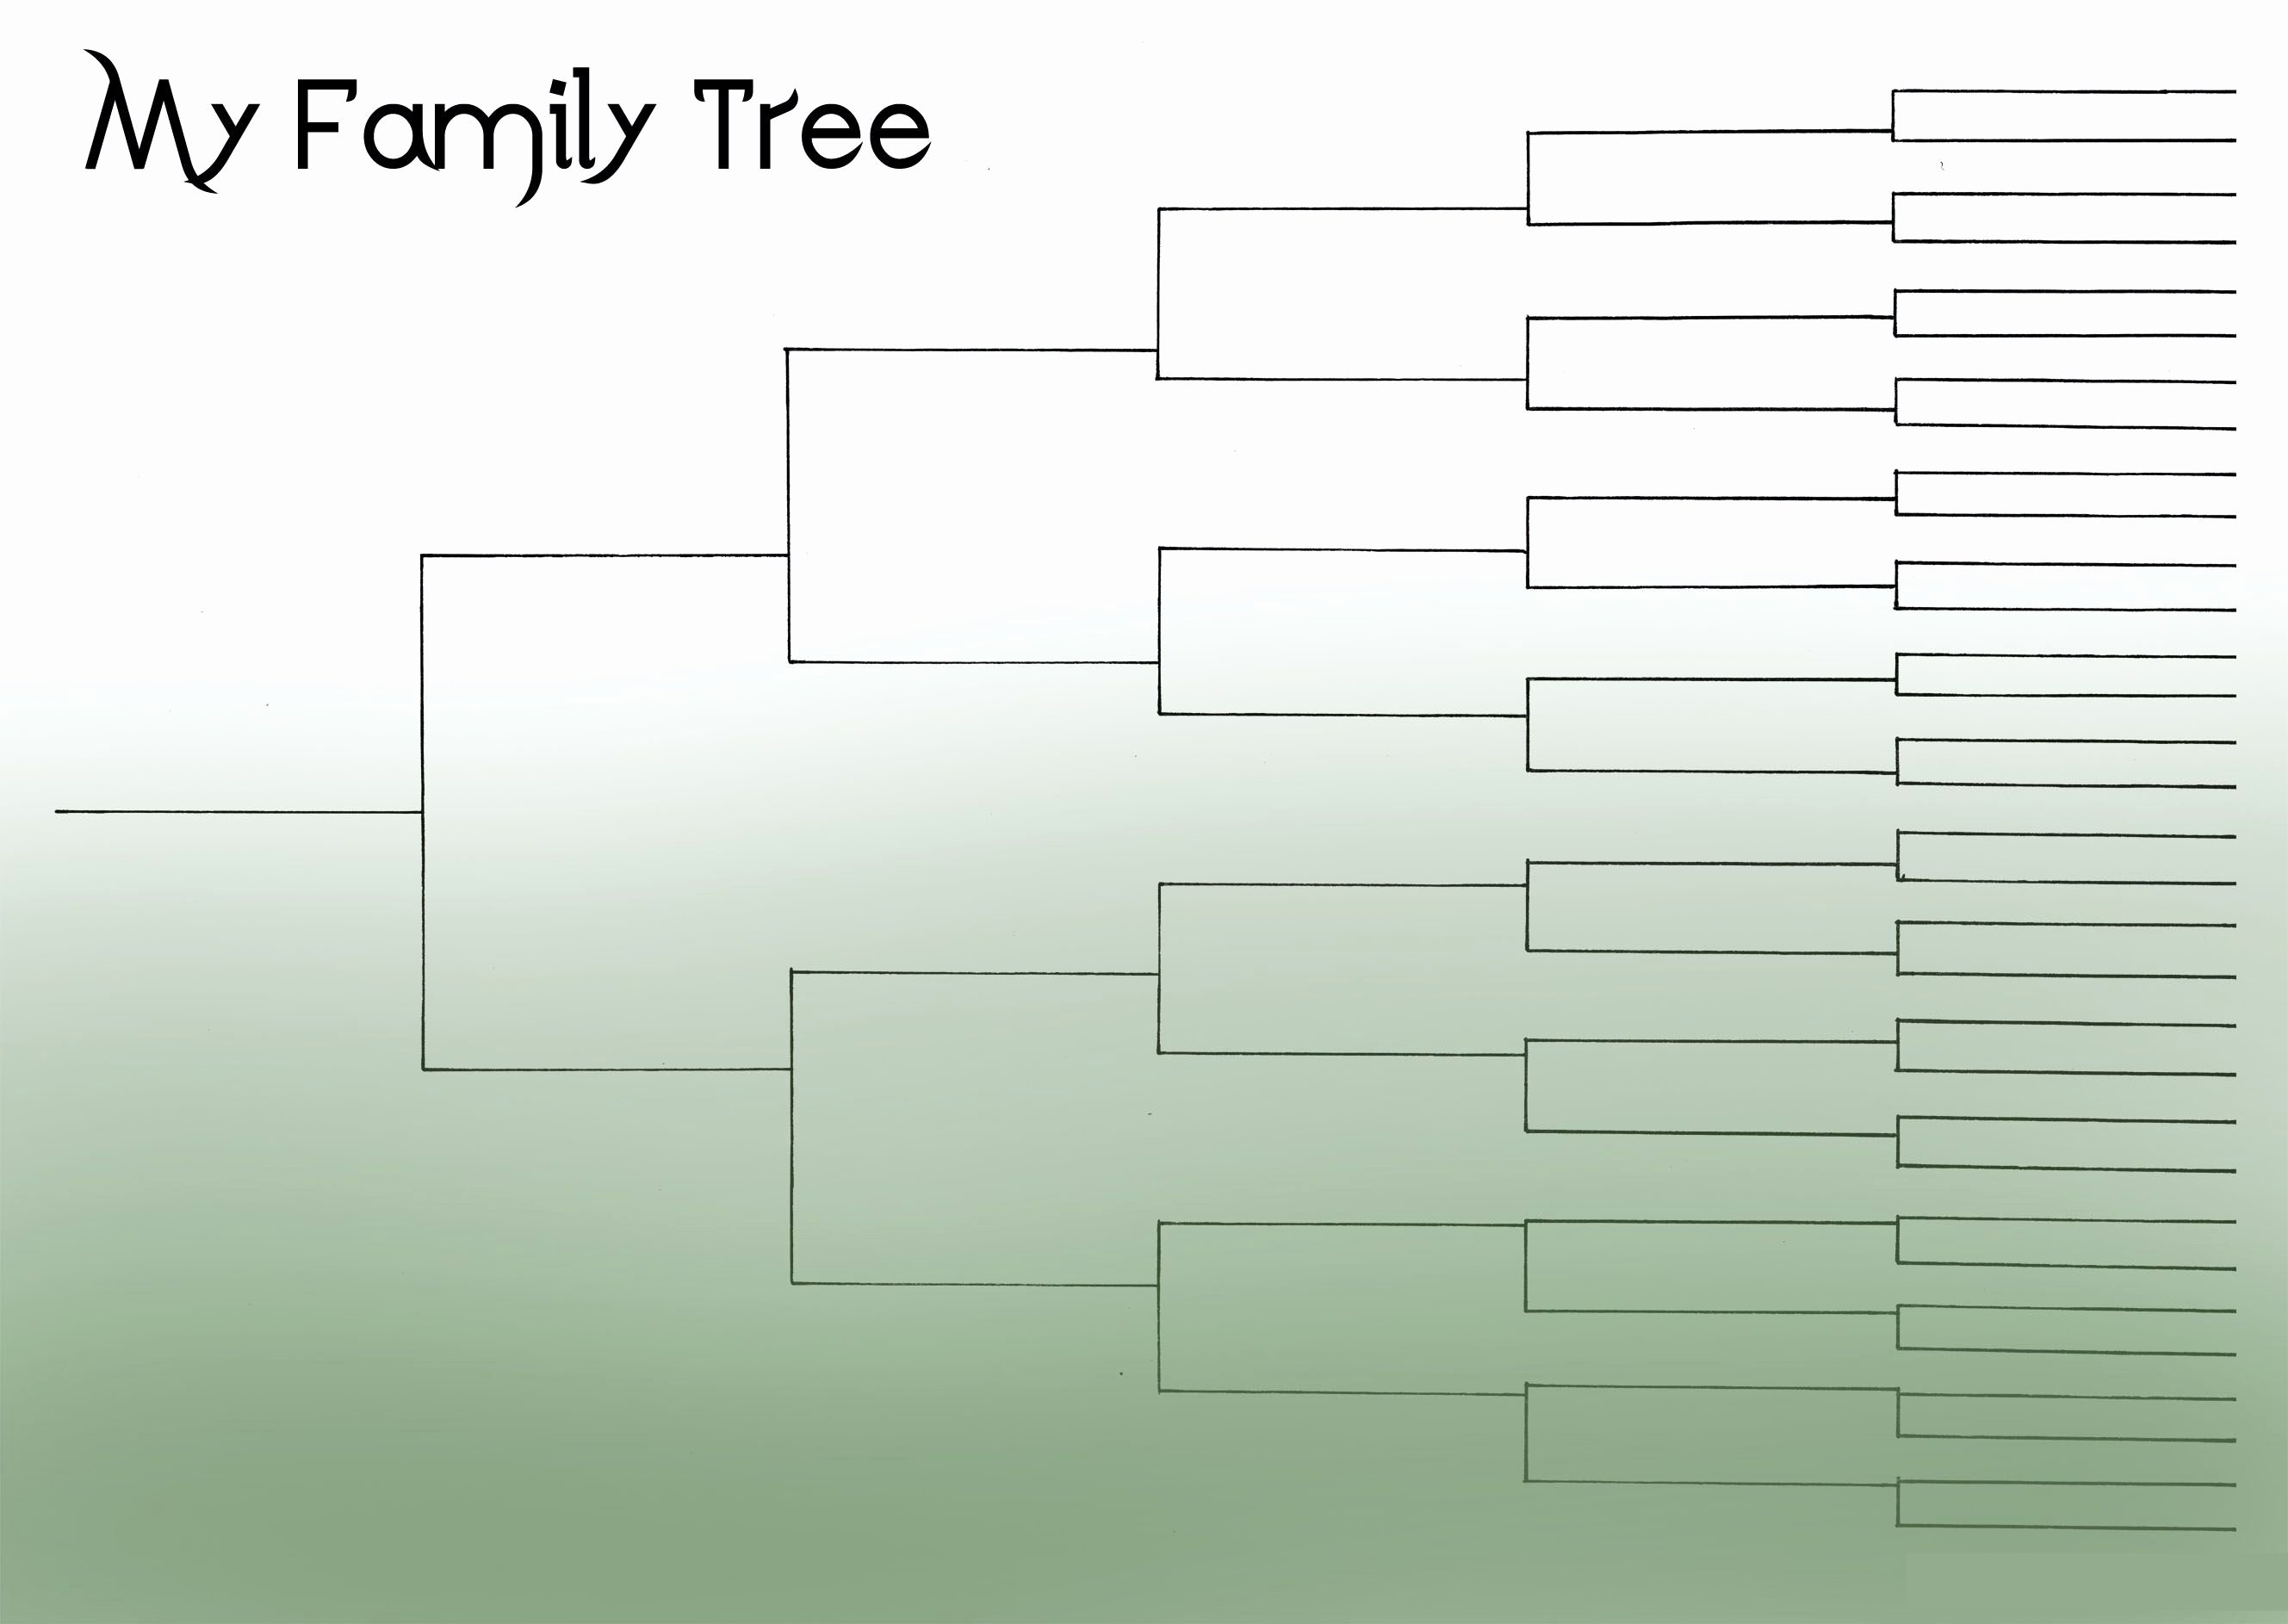 Family Tree Template Free Editable Best Of Free Editable Family Tree Template Daily Roabox